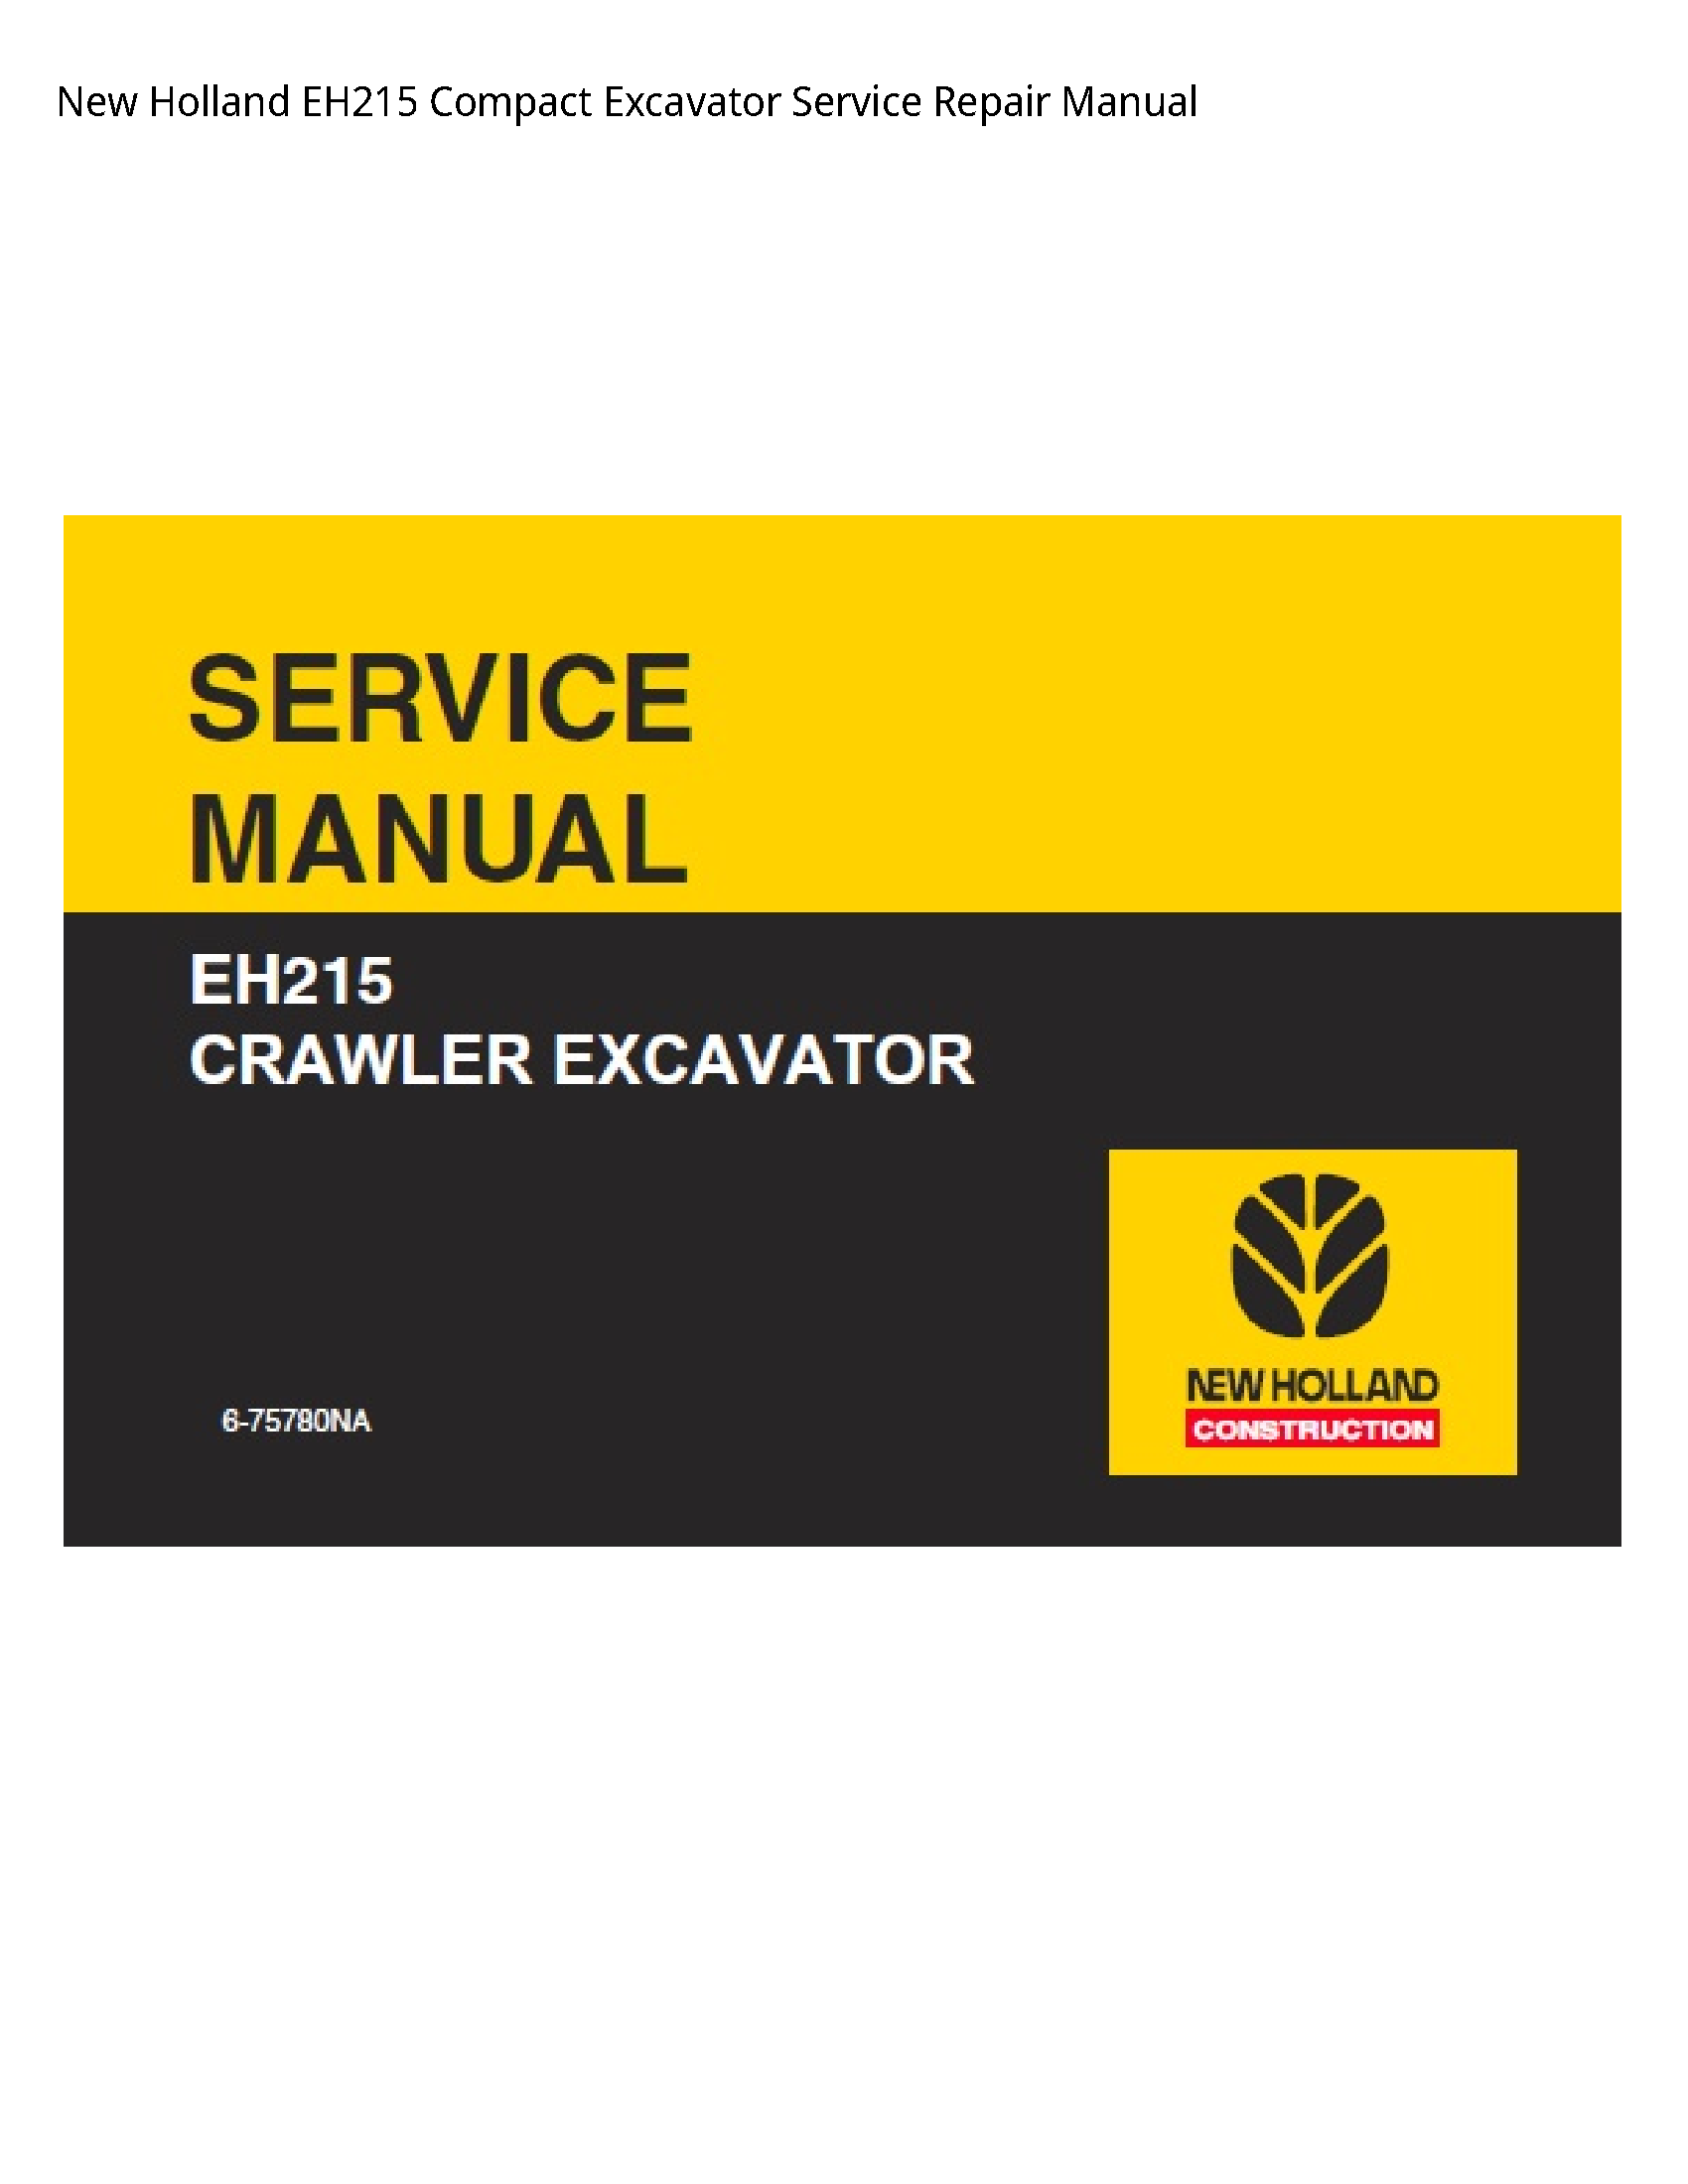 New Holland EH215 Compact Excavator manual